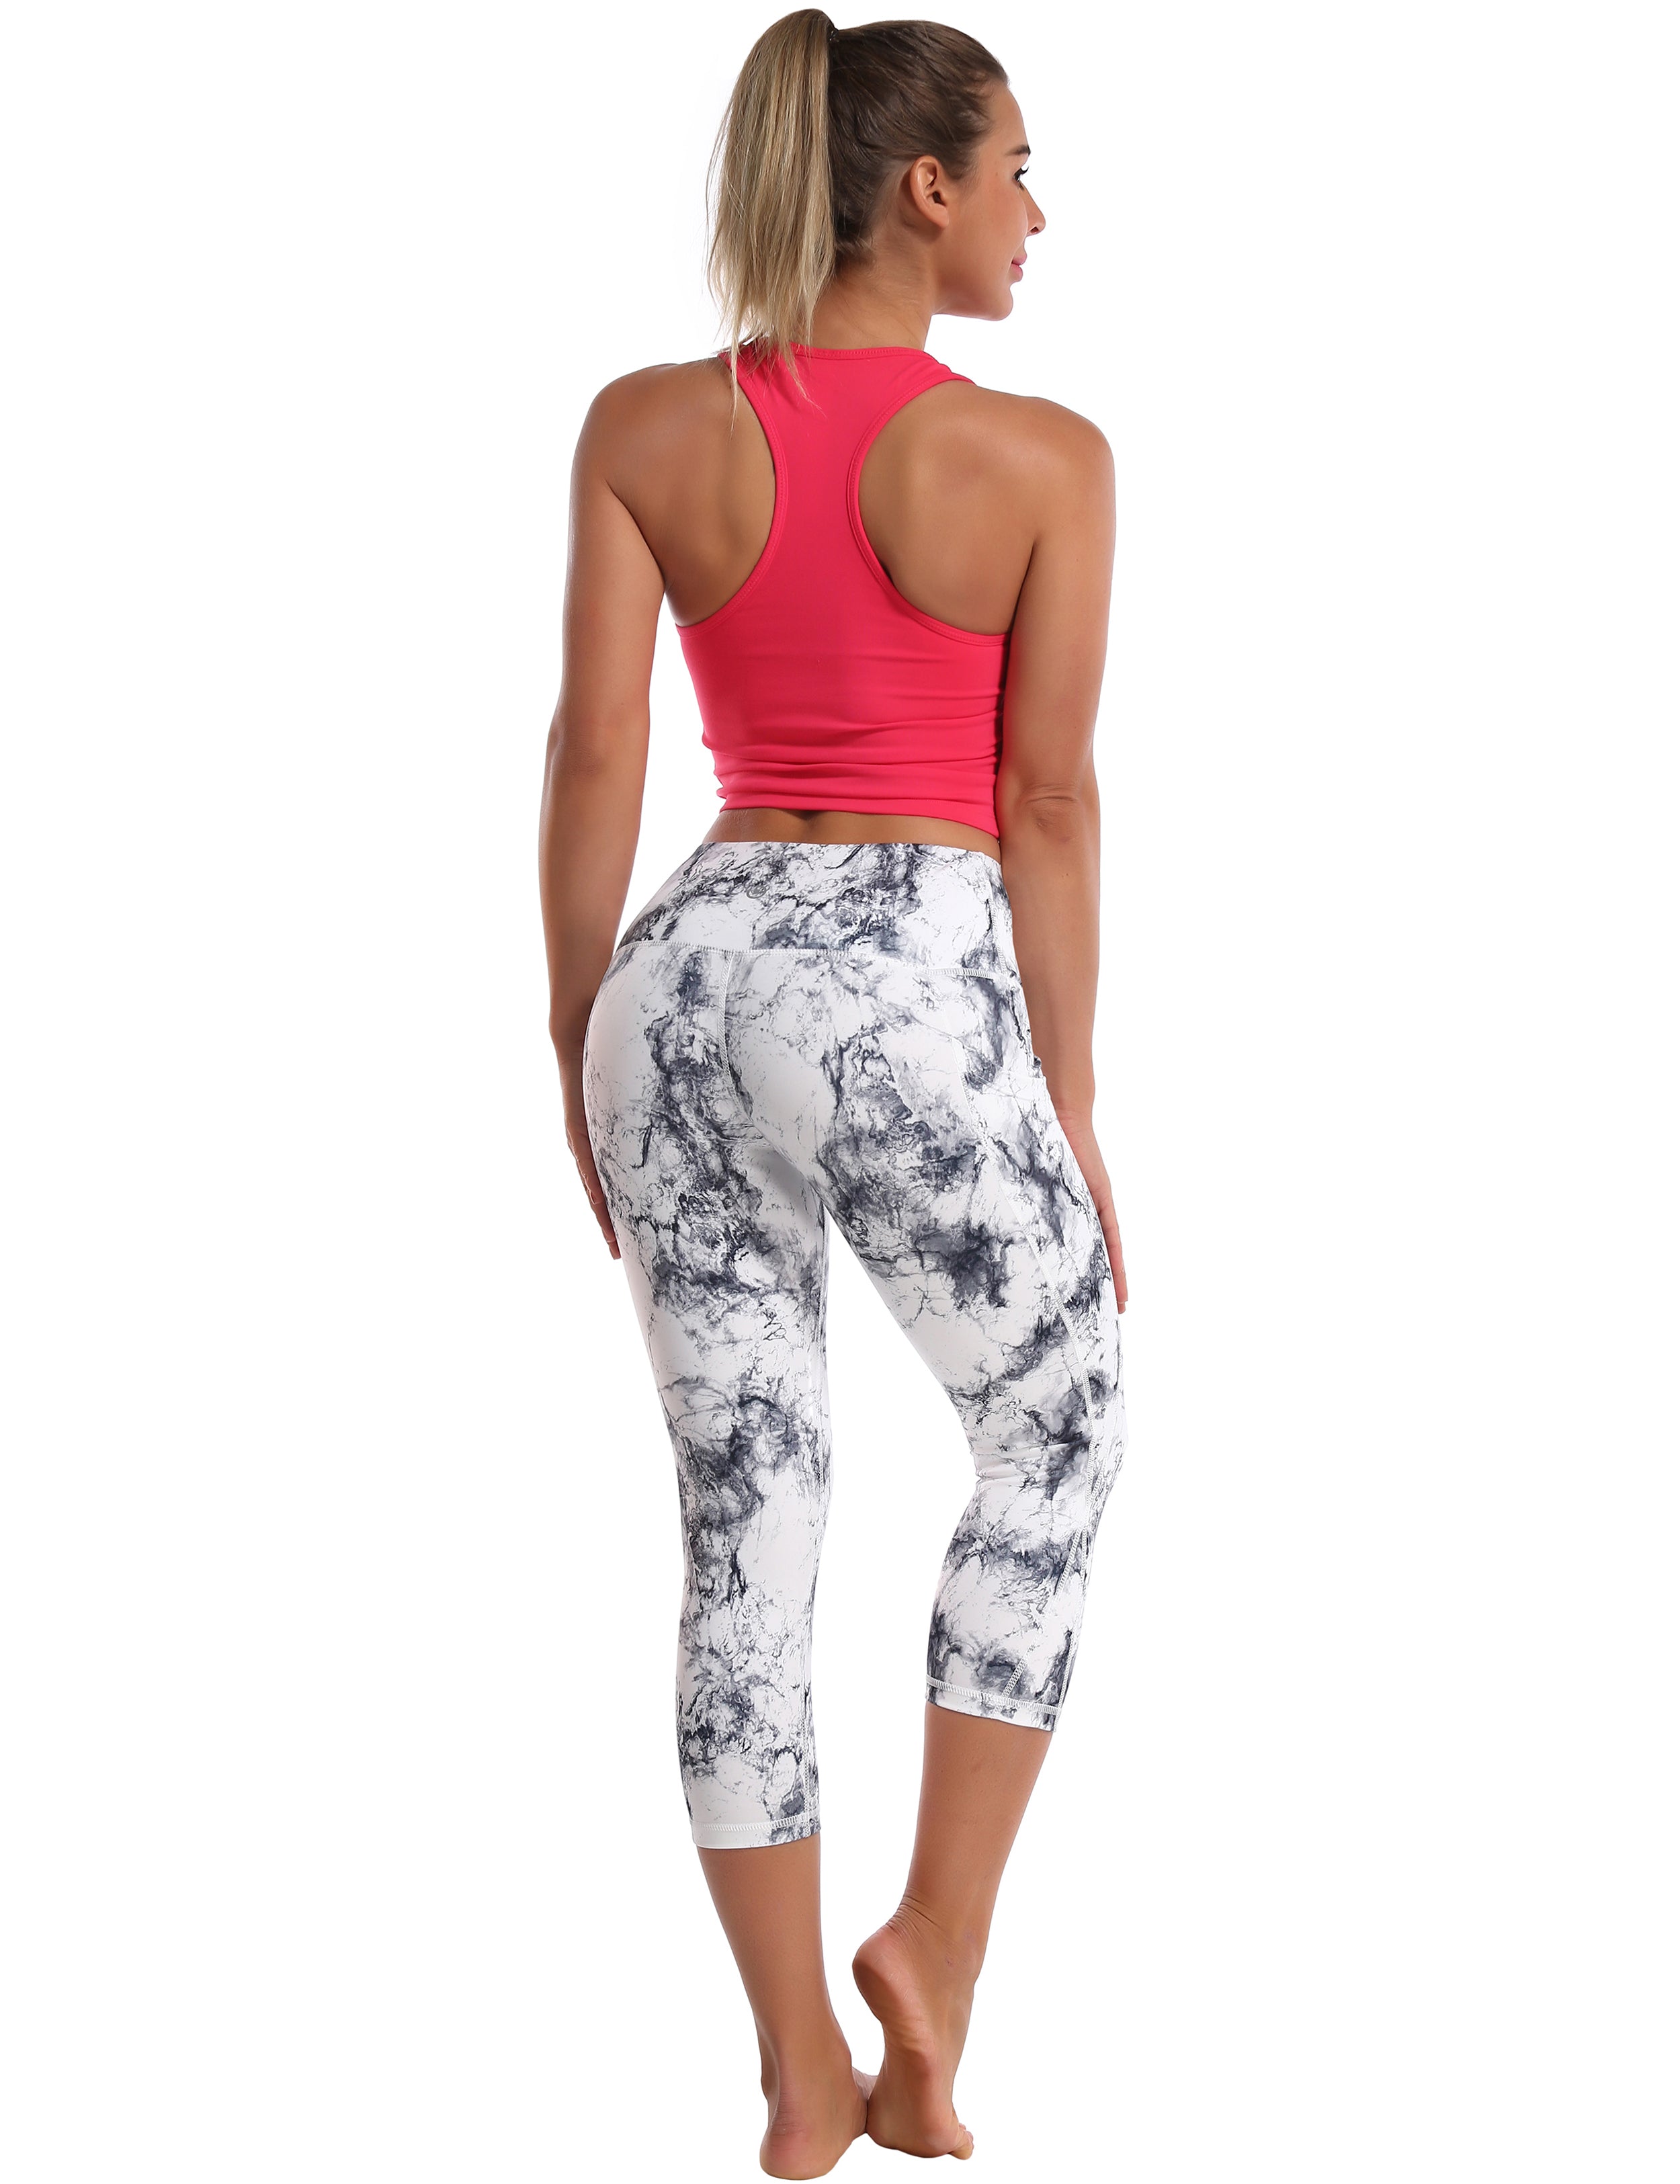 19" High Waist Side Pockets Capris arabescato 75%Nylon/25%Spandex Fabric doesn't attract lint easily 4-way stretch No see-through Moisture-wicking Tummy control Inner pocket